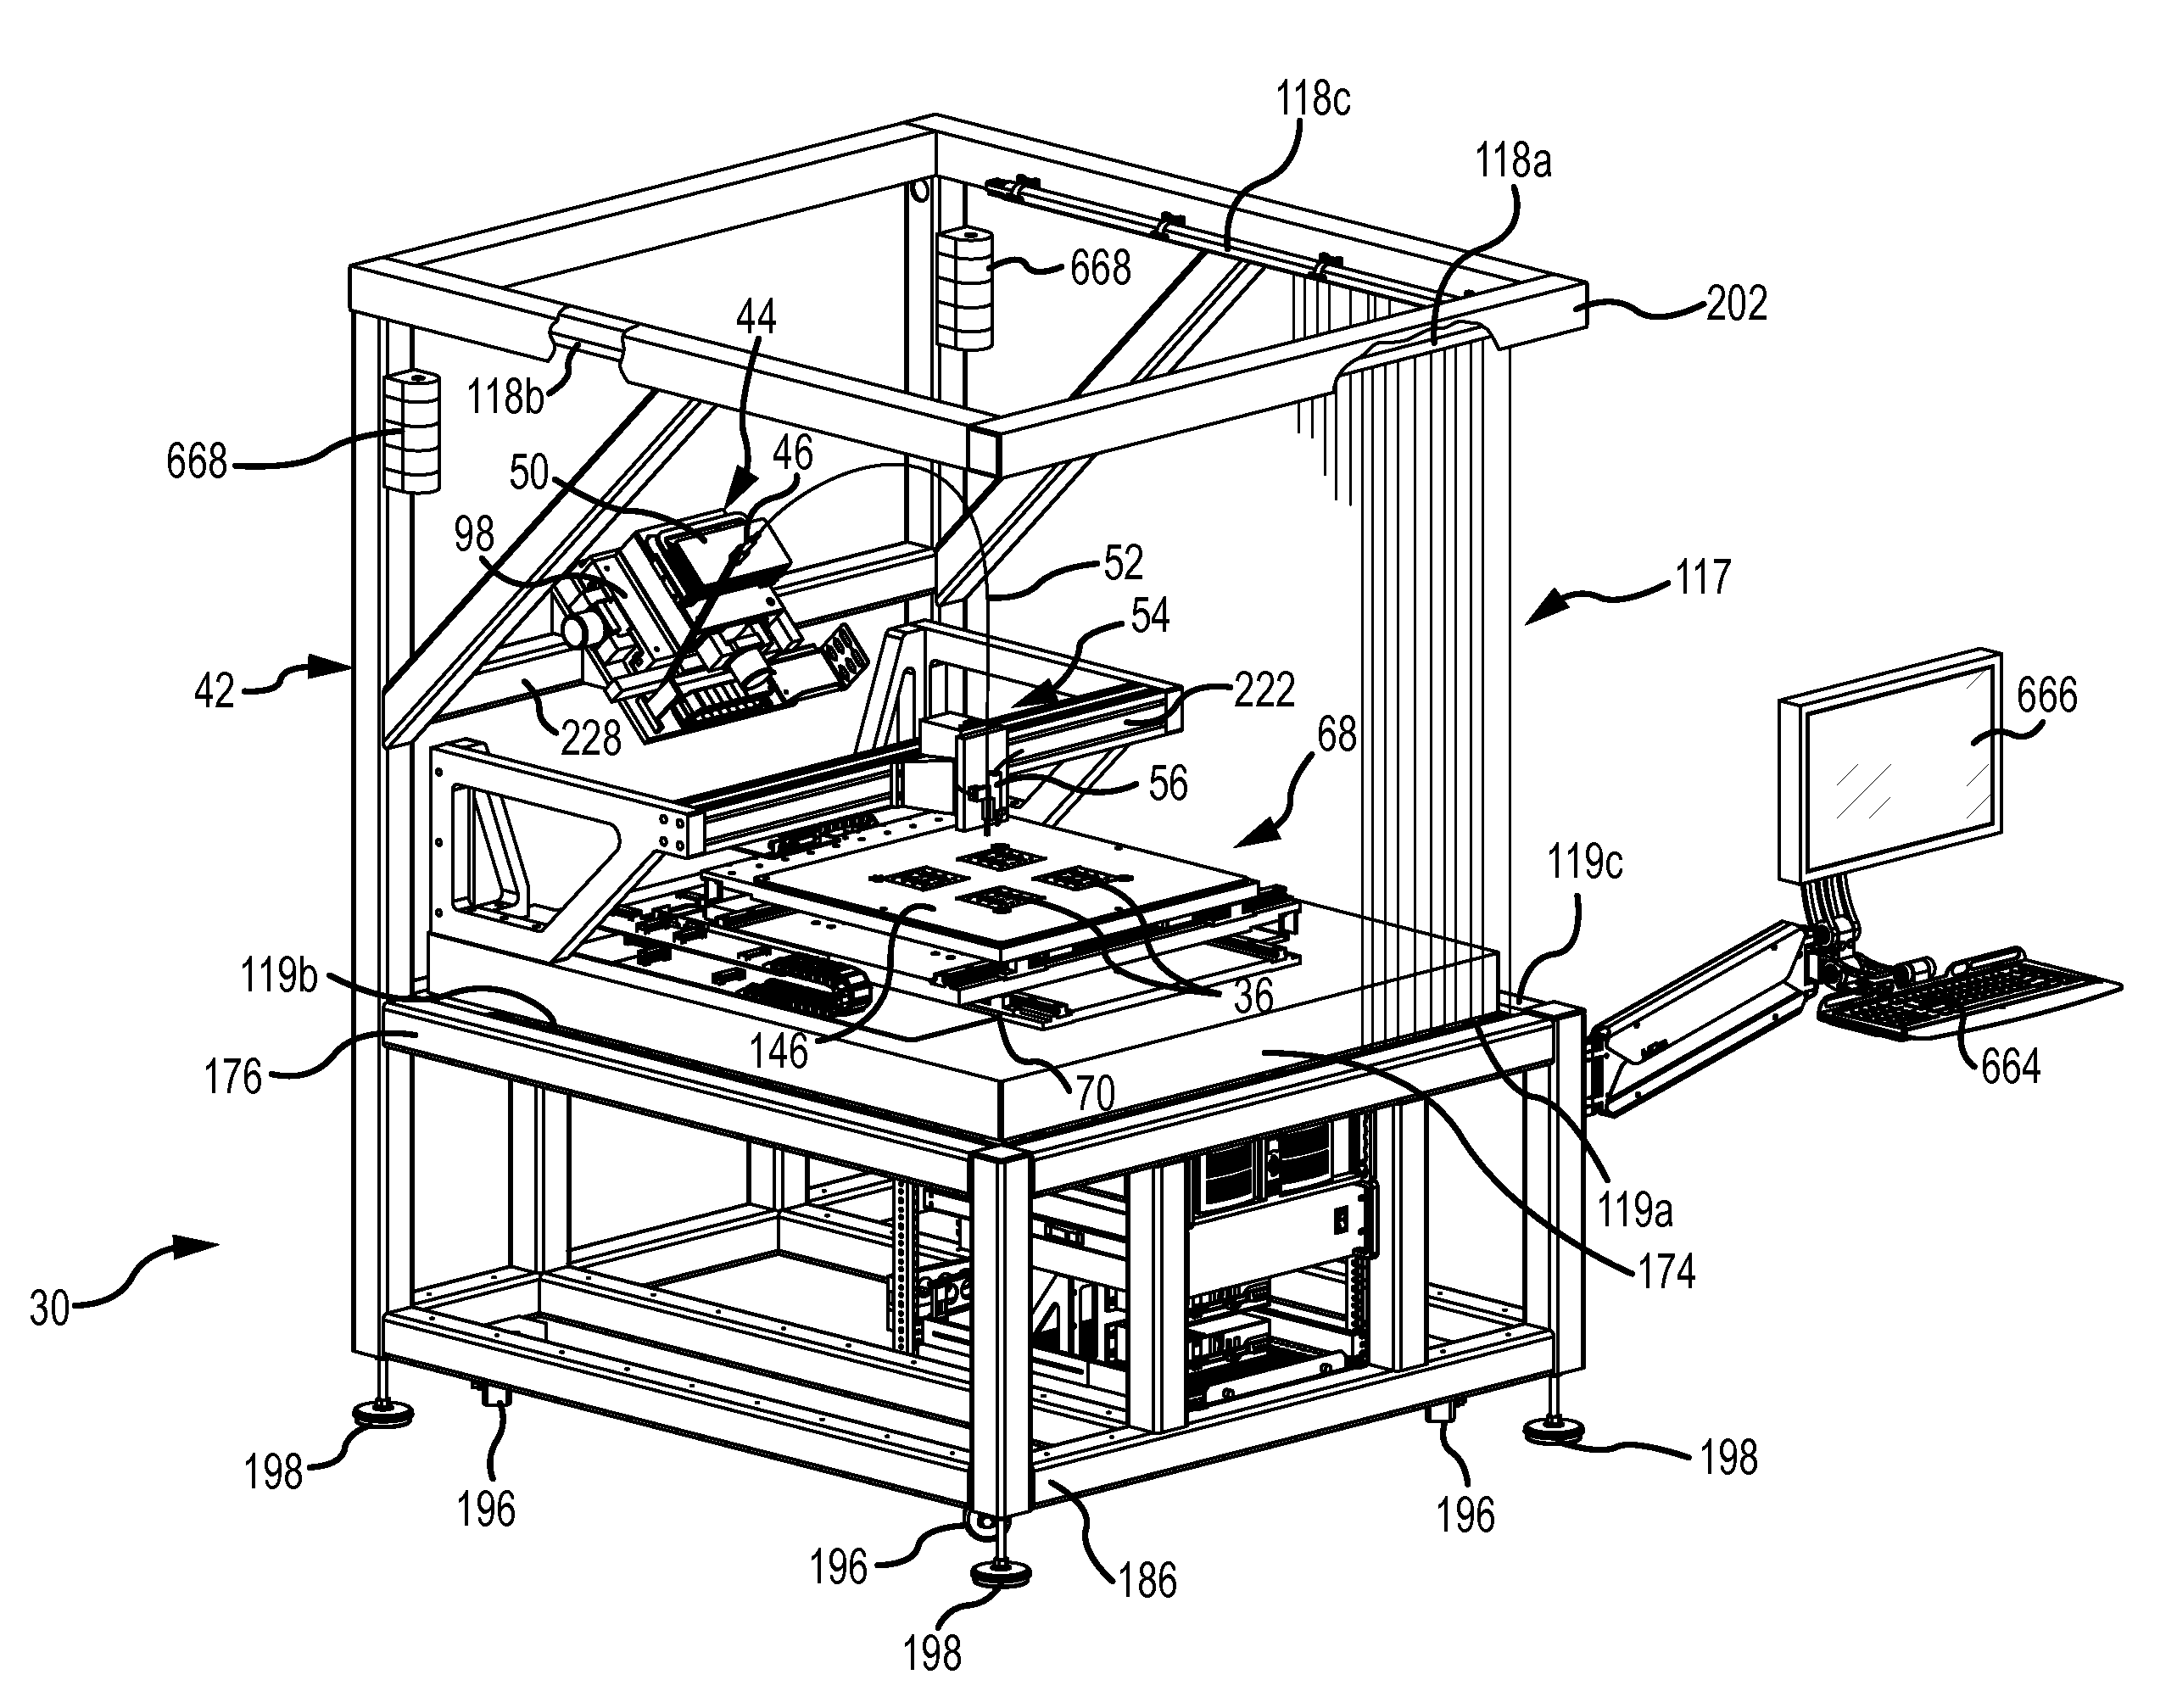 Automated twist pin assembling machine for interconnecting stacked circuit boards in a module